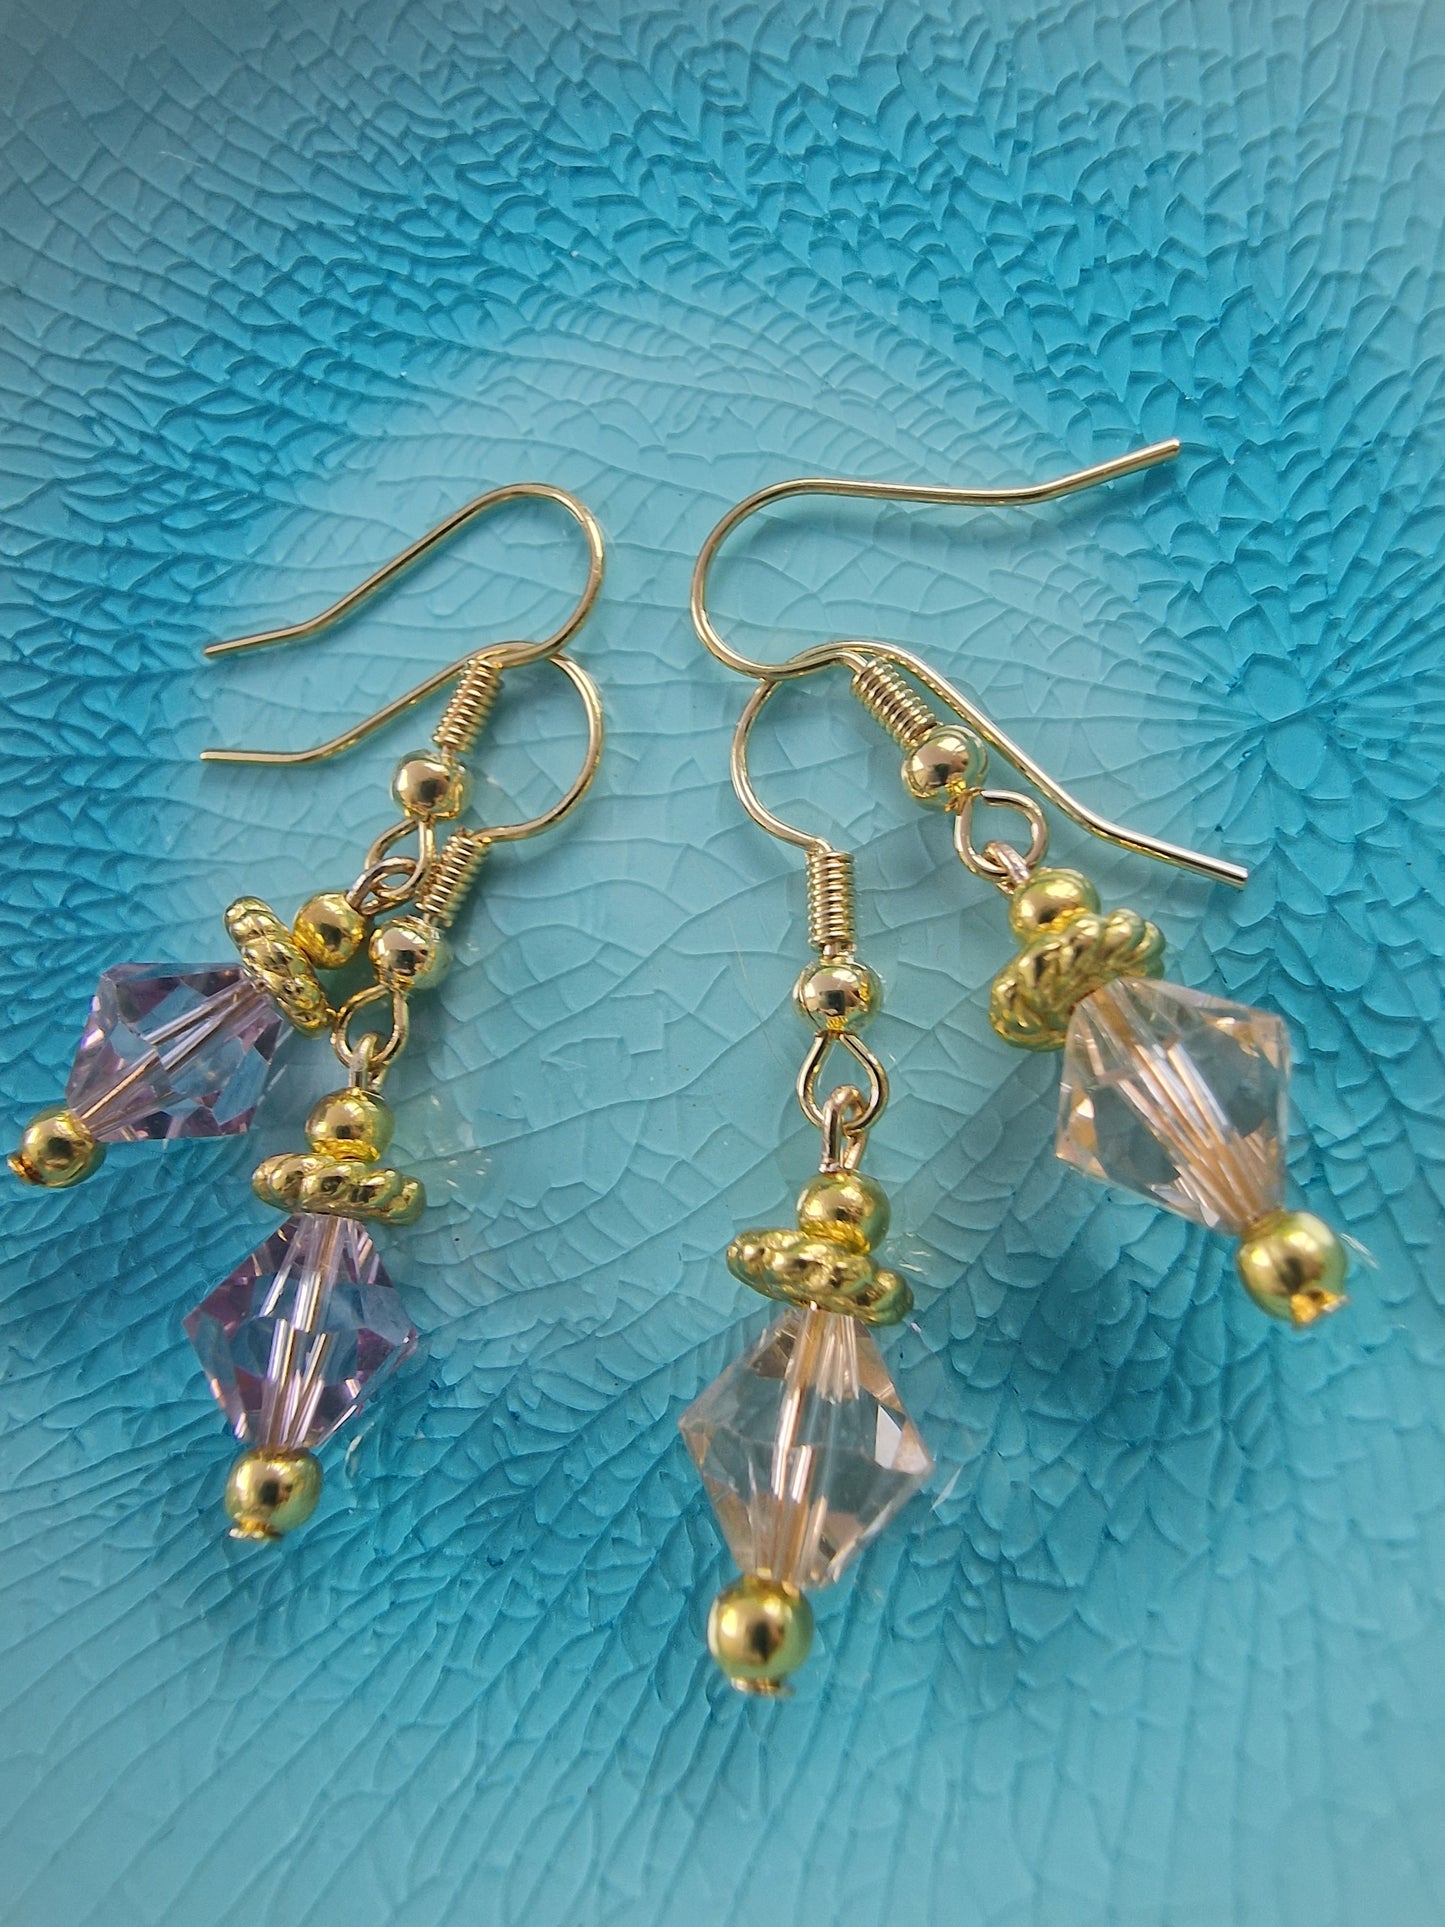 Swarovski gold earrings in lavender and light peach colours